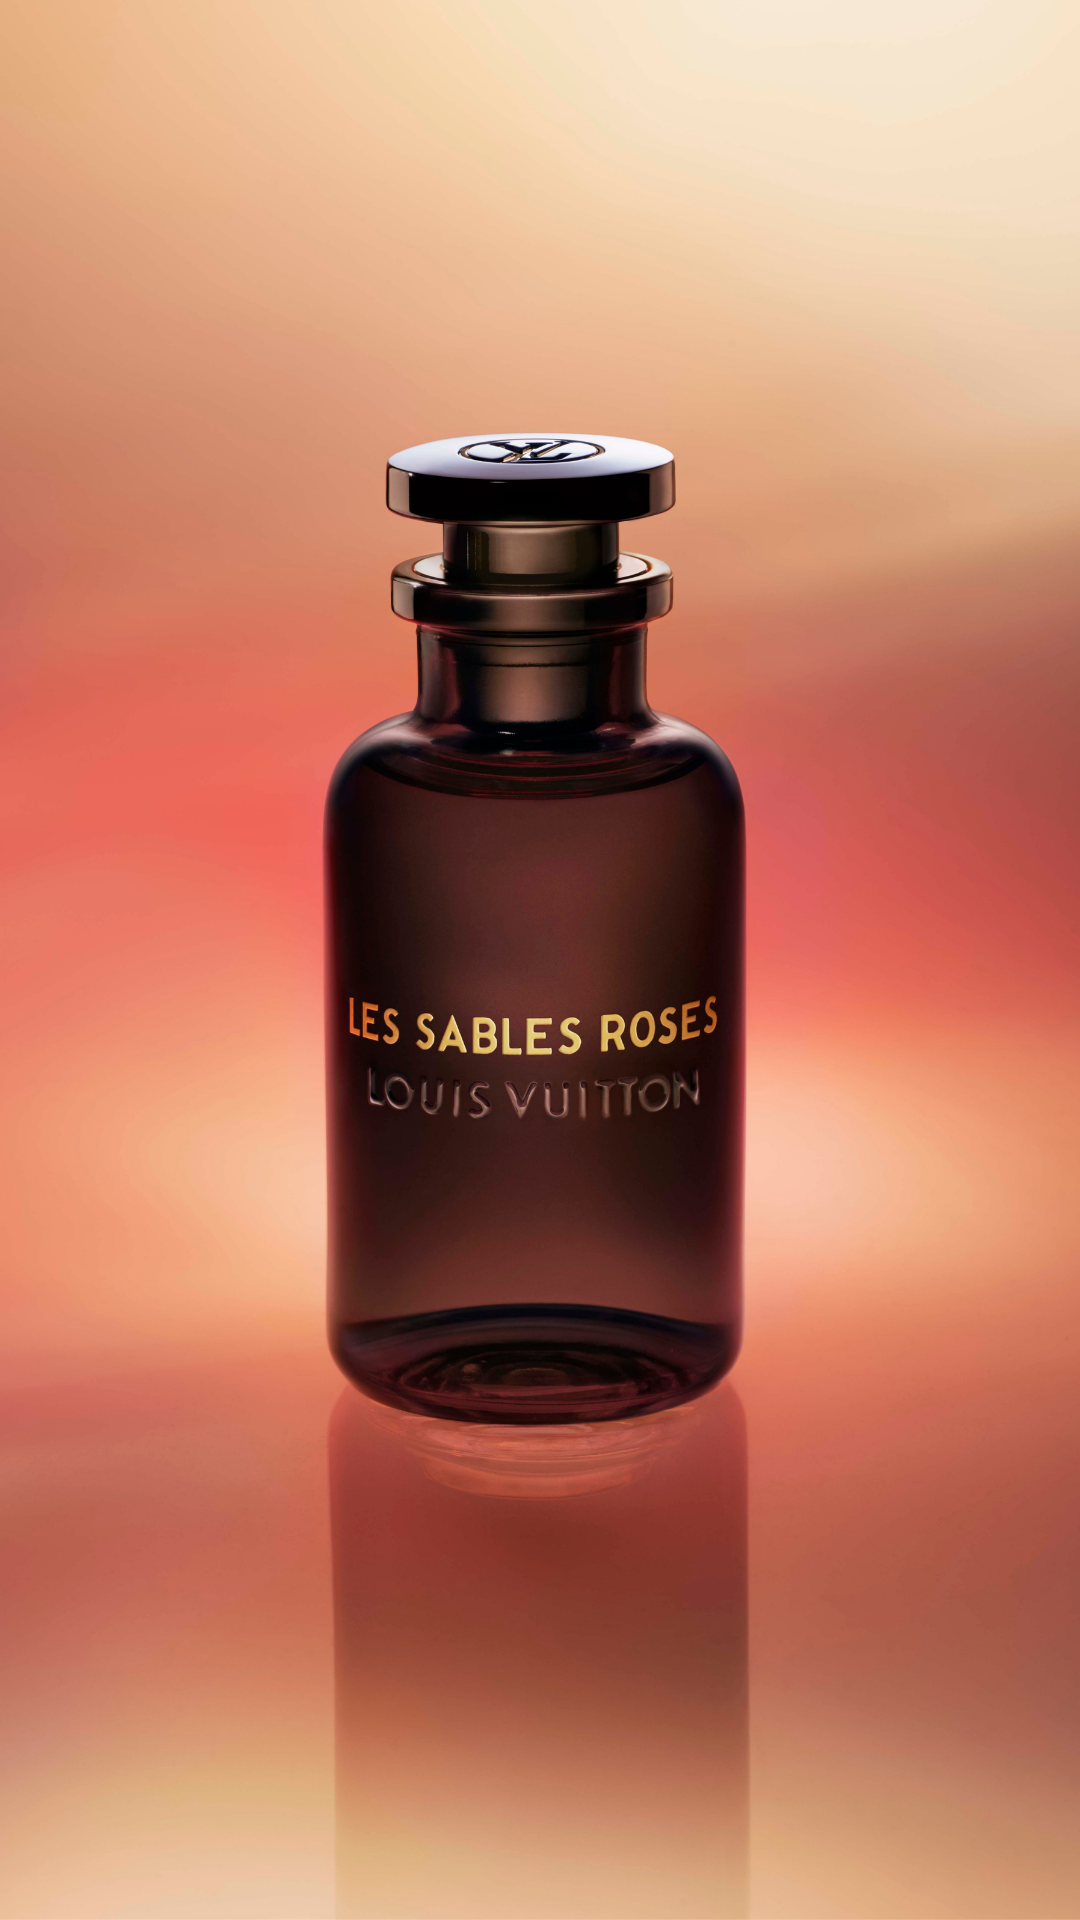 Louis Vuitton Highlights the Scents of the Middle East With Fleur